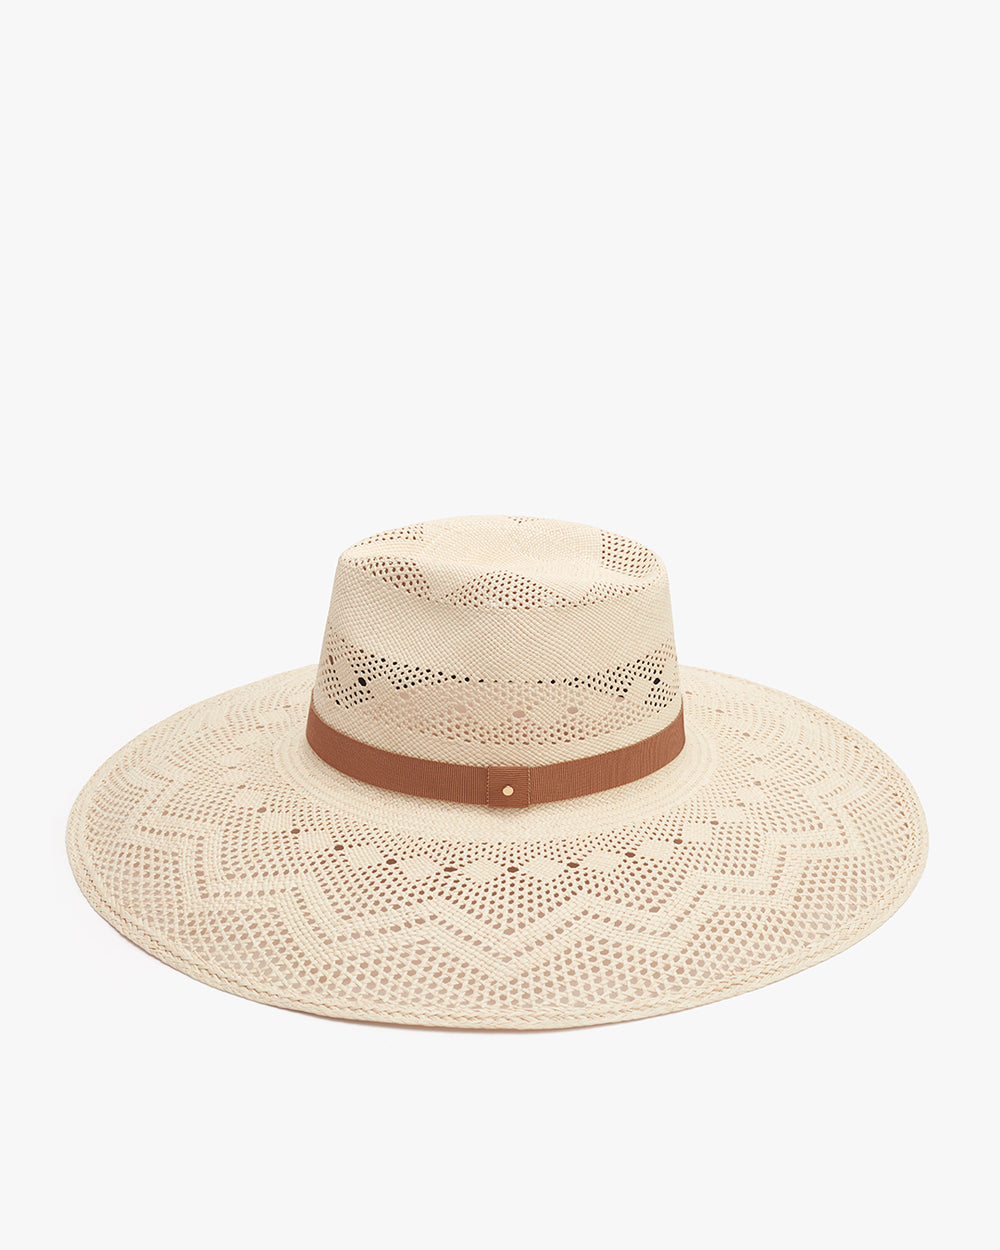 Wide-brimmed hat with patterned design and solid band